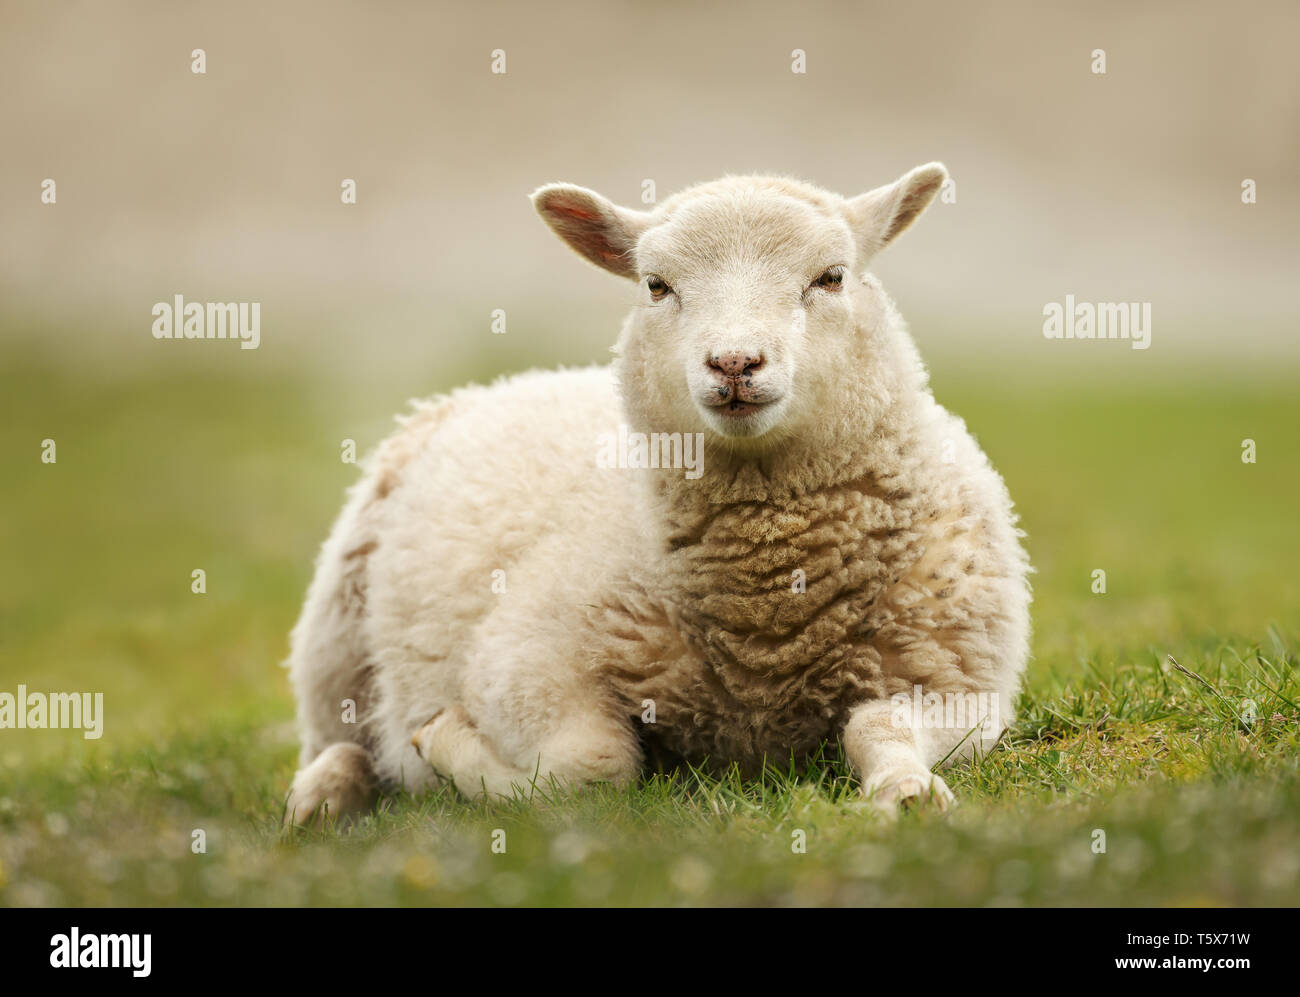 Close up of a Northern European short-tailed sheep laying on the grass, Scotland. Stock Photo